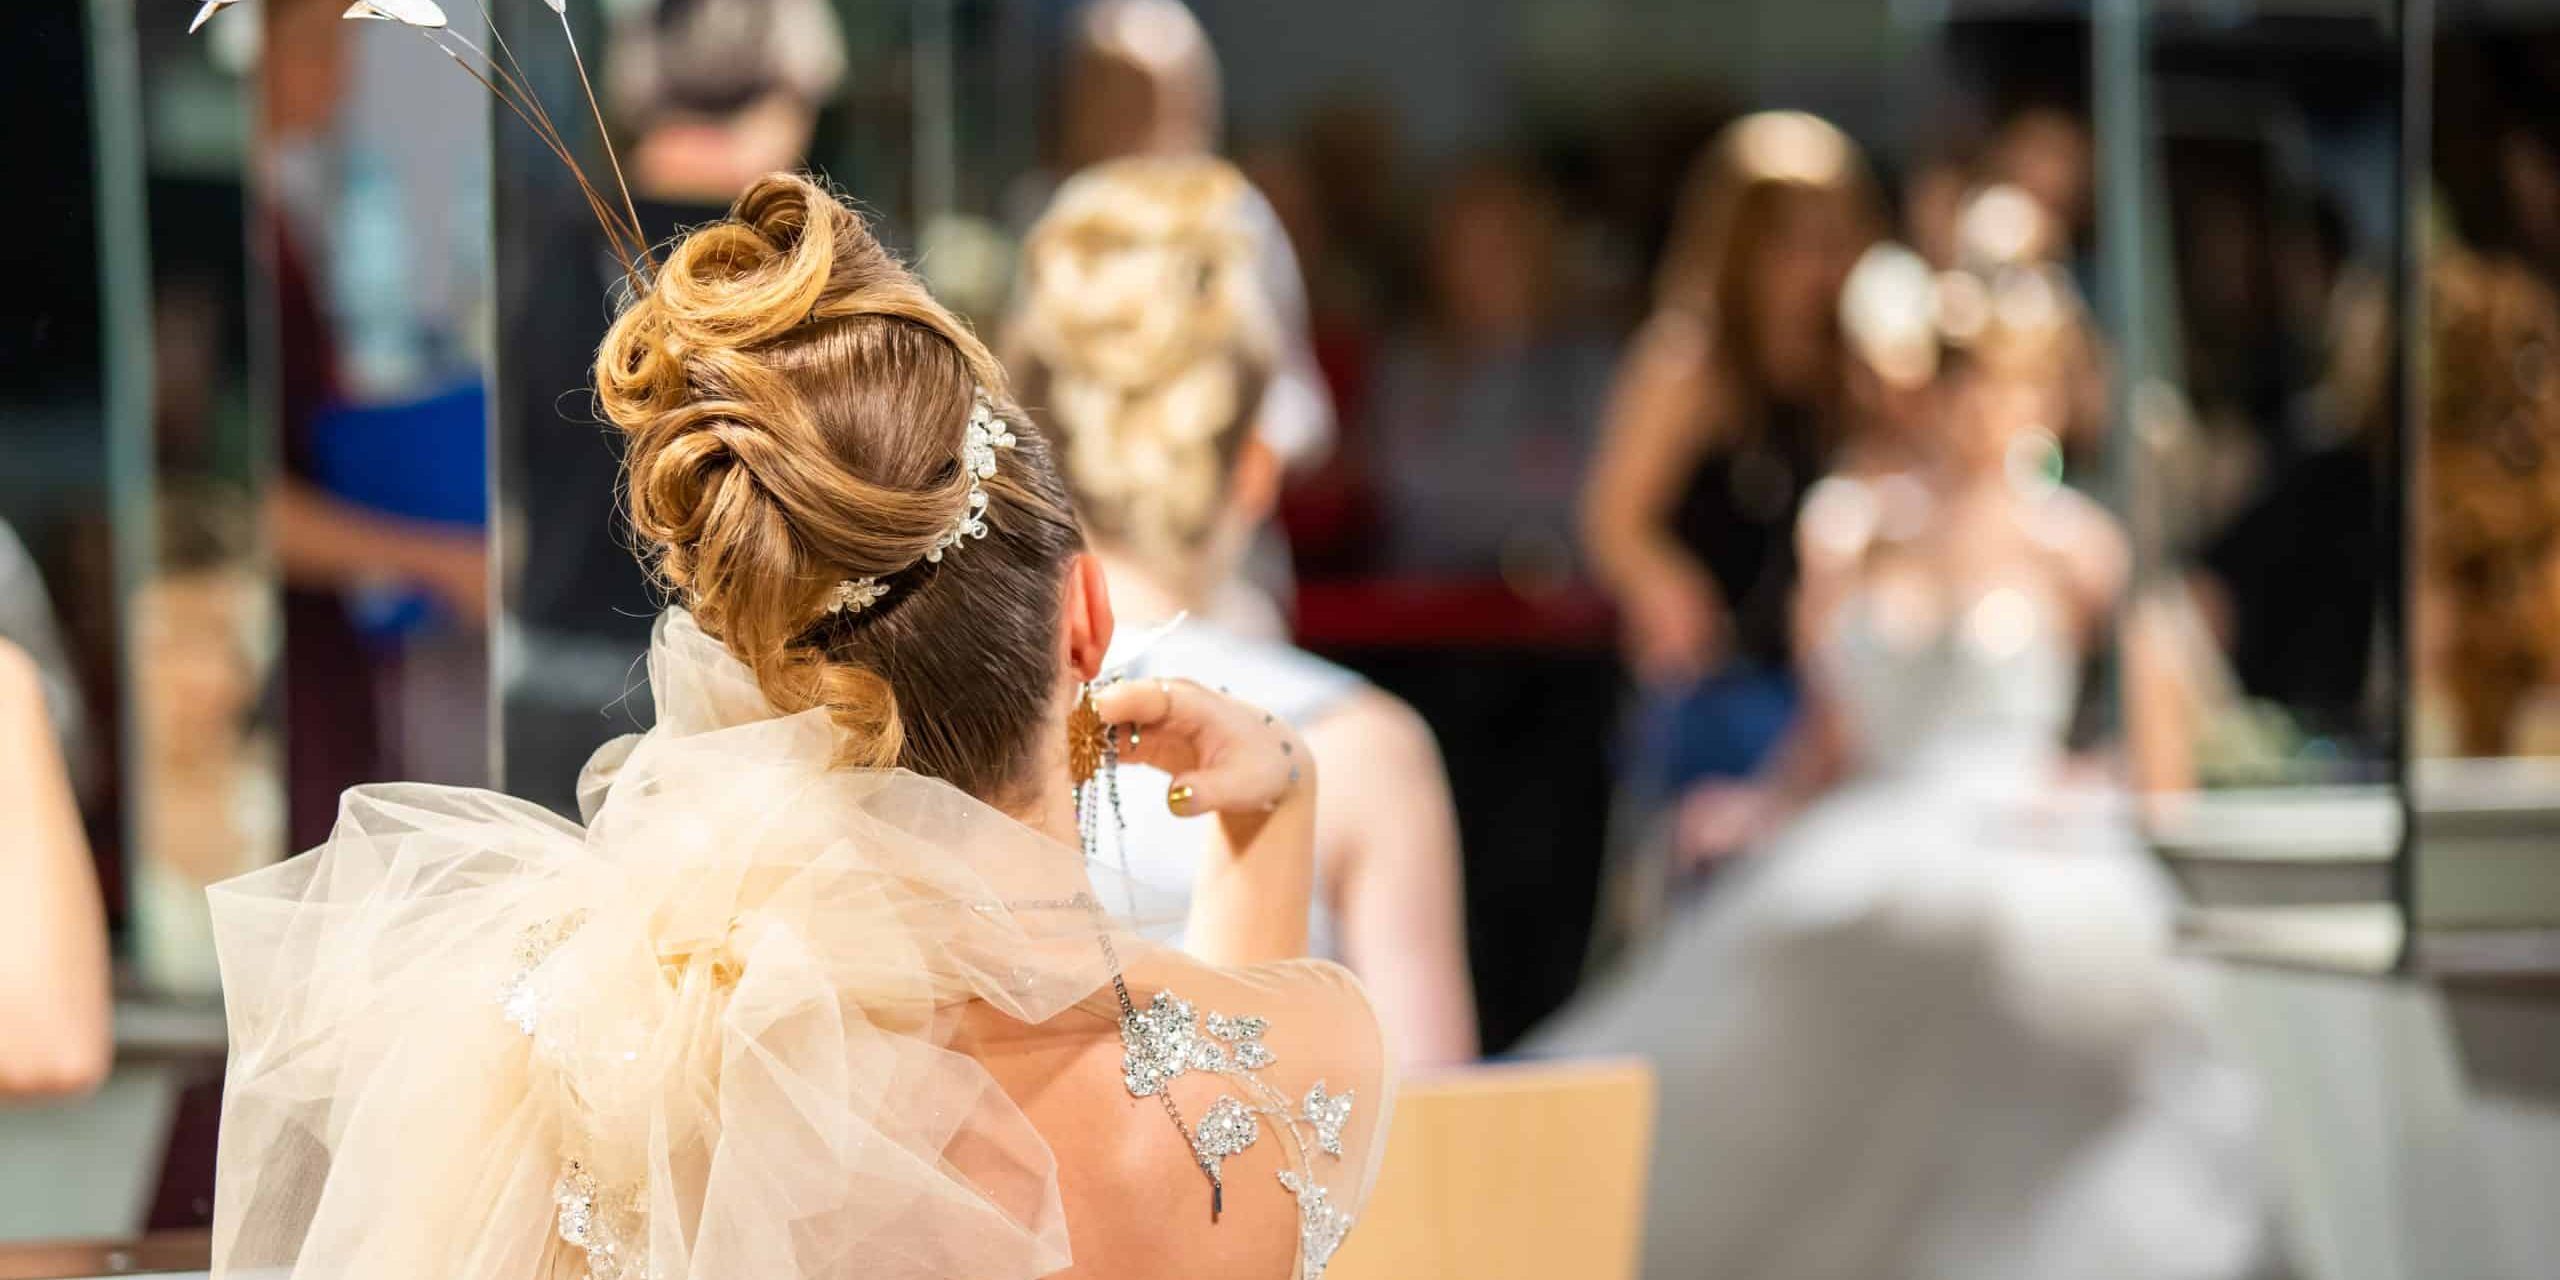 Wedding fashion event, models styled for brides with wedding hairstyles